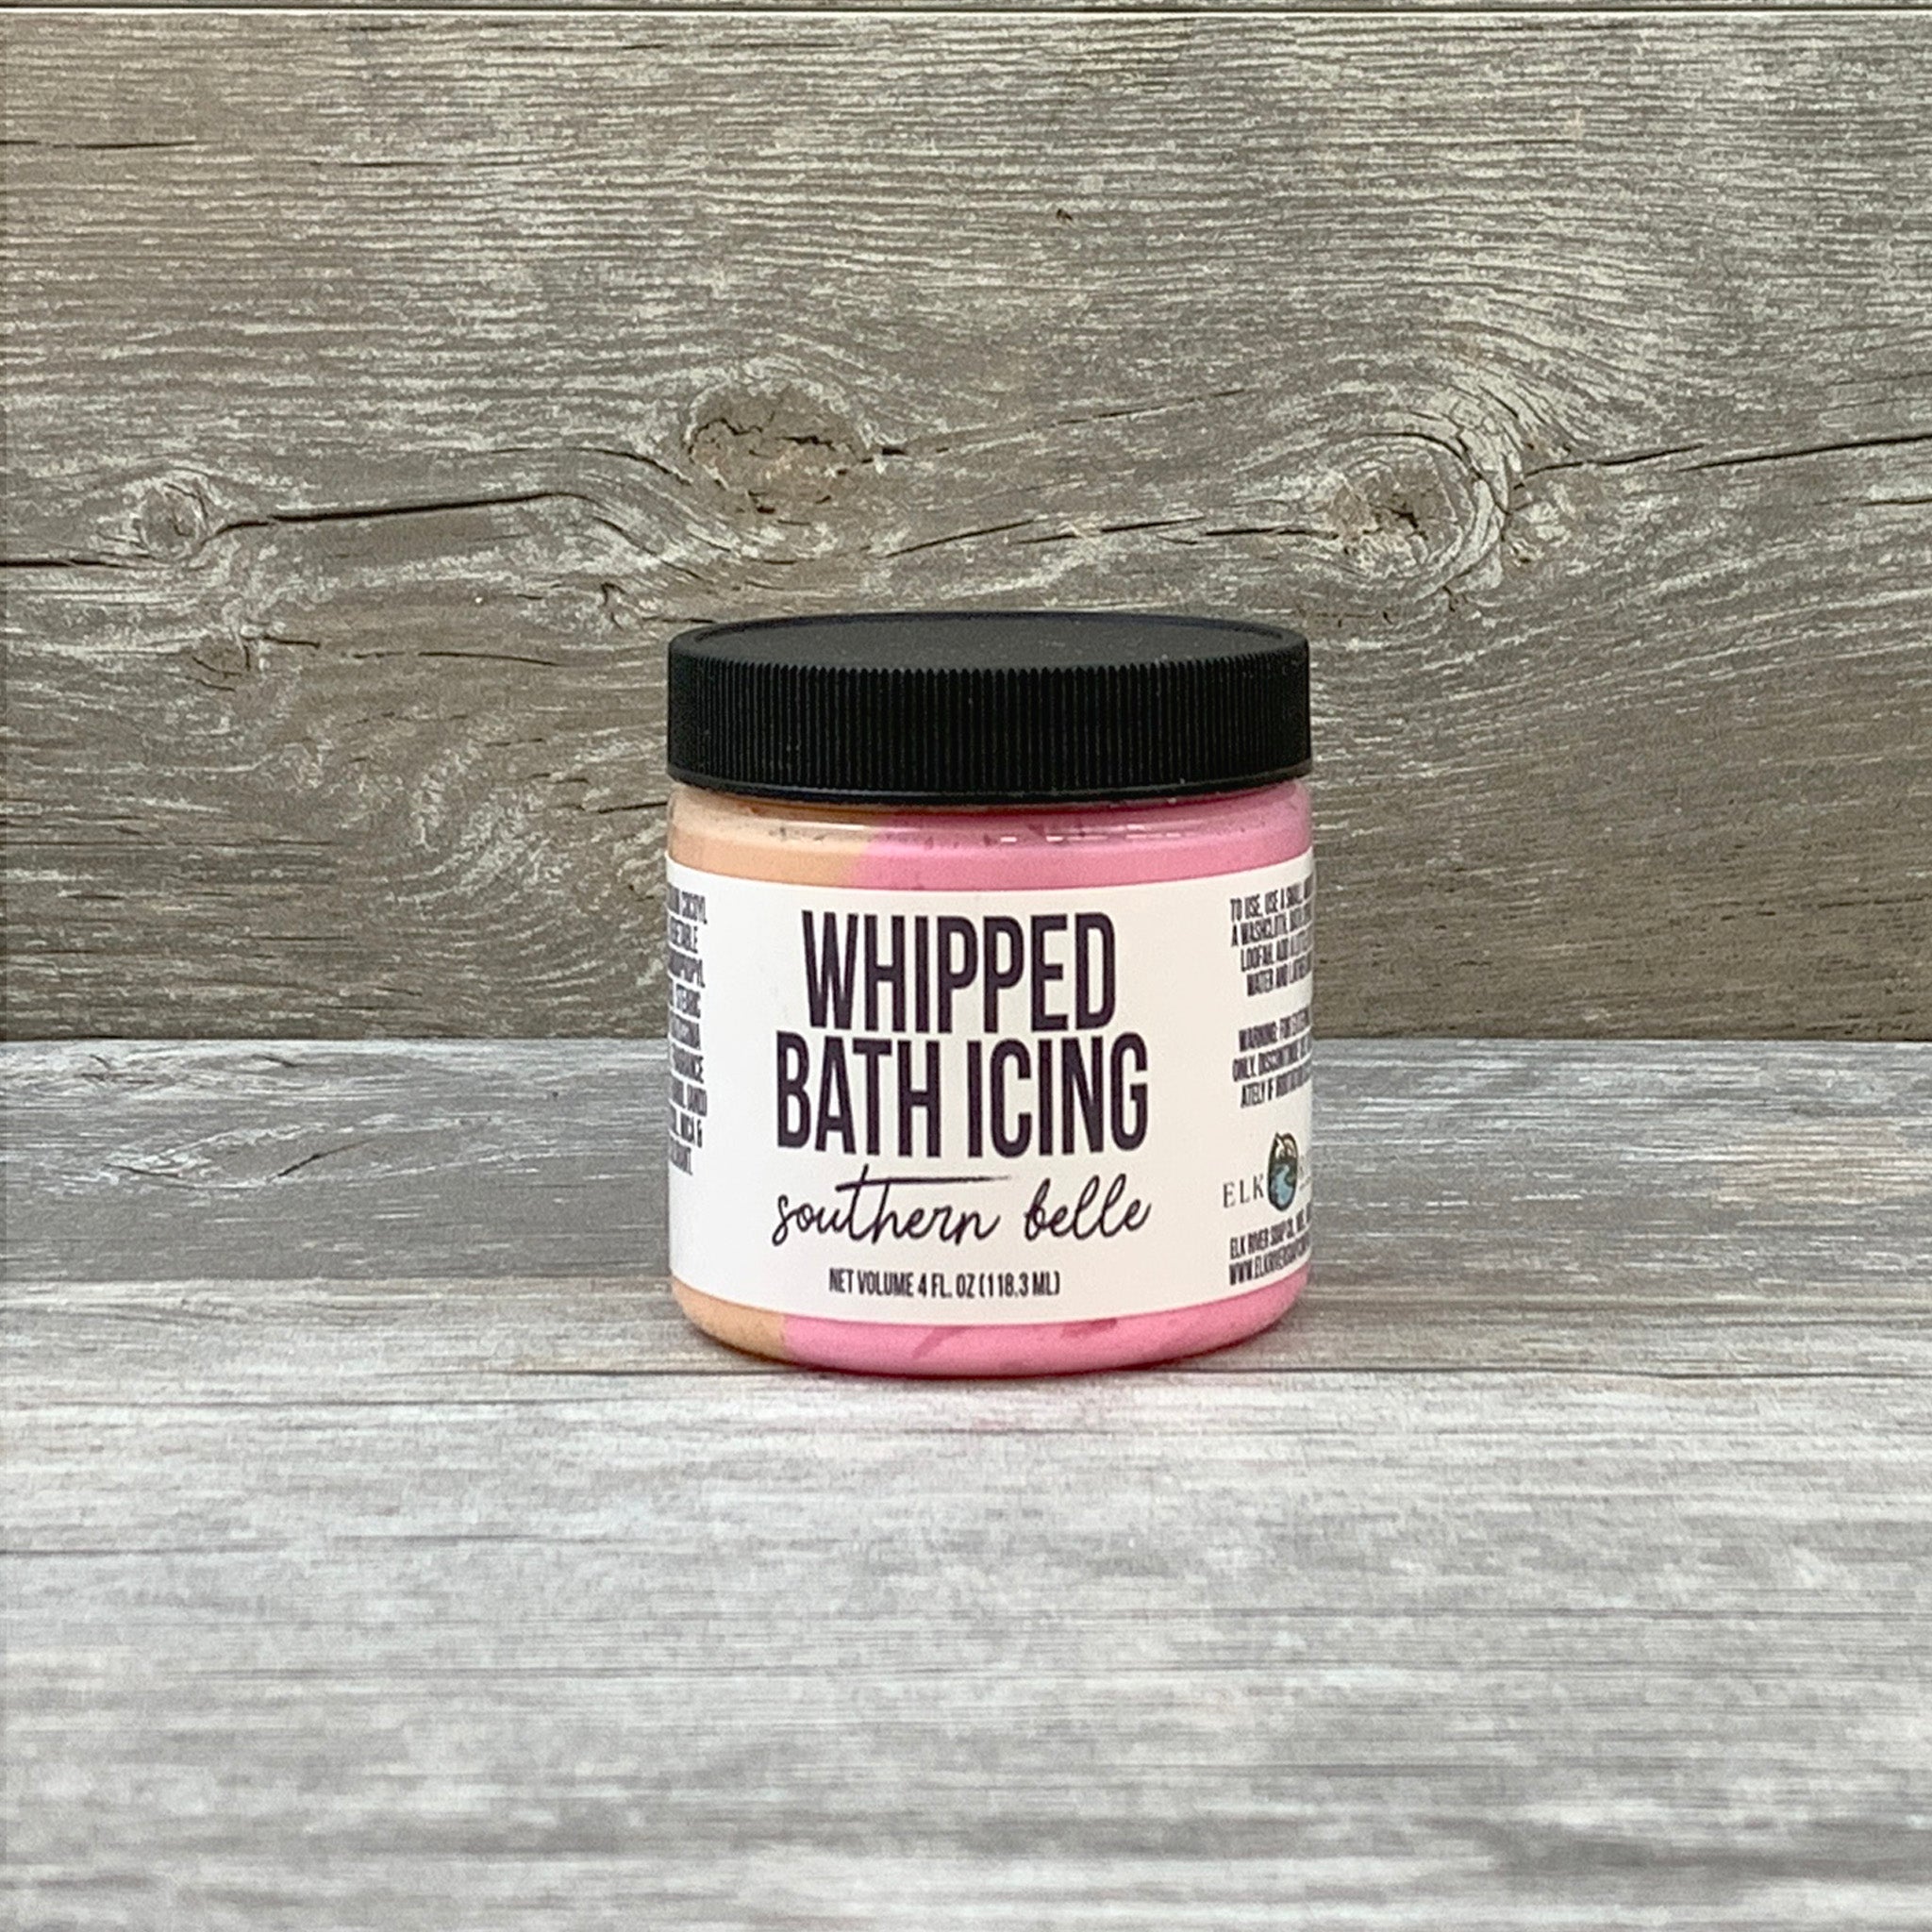 Southern Belle Whipped Bath Icing